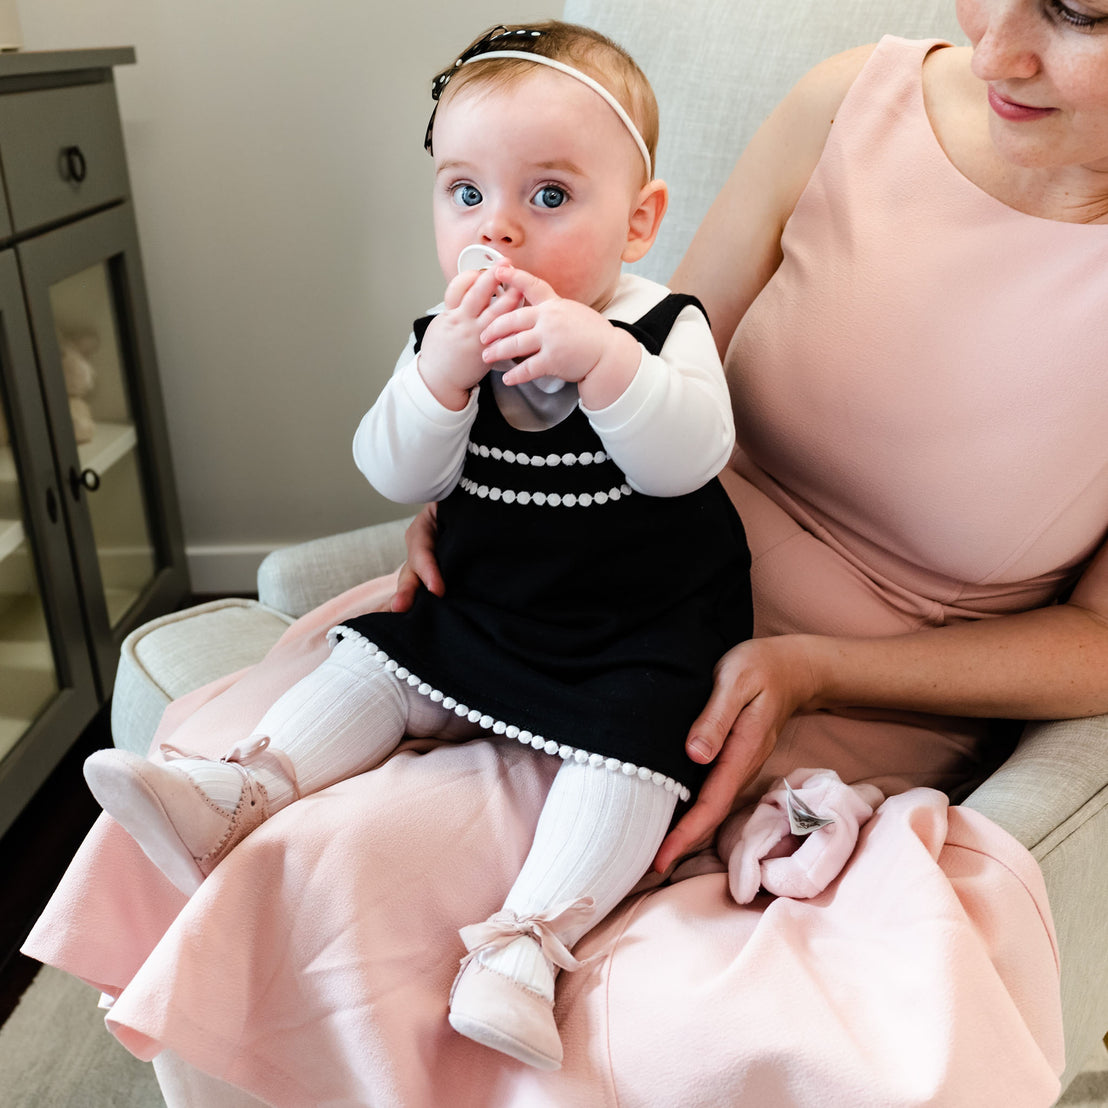 A woman in a pink dress holds a baby wearing the June Jumper Dress Set, who is chewing on her pacifier. They are sitting in an elegantly furnished room after the christening.